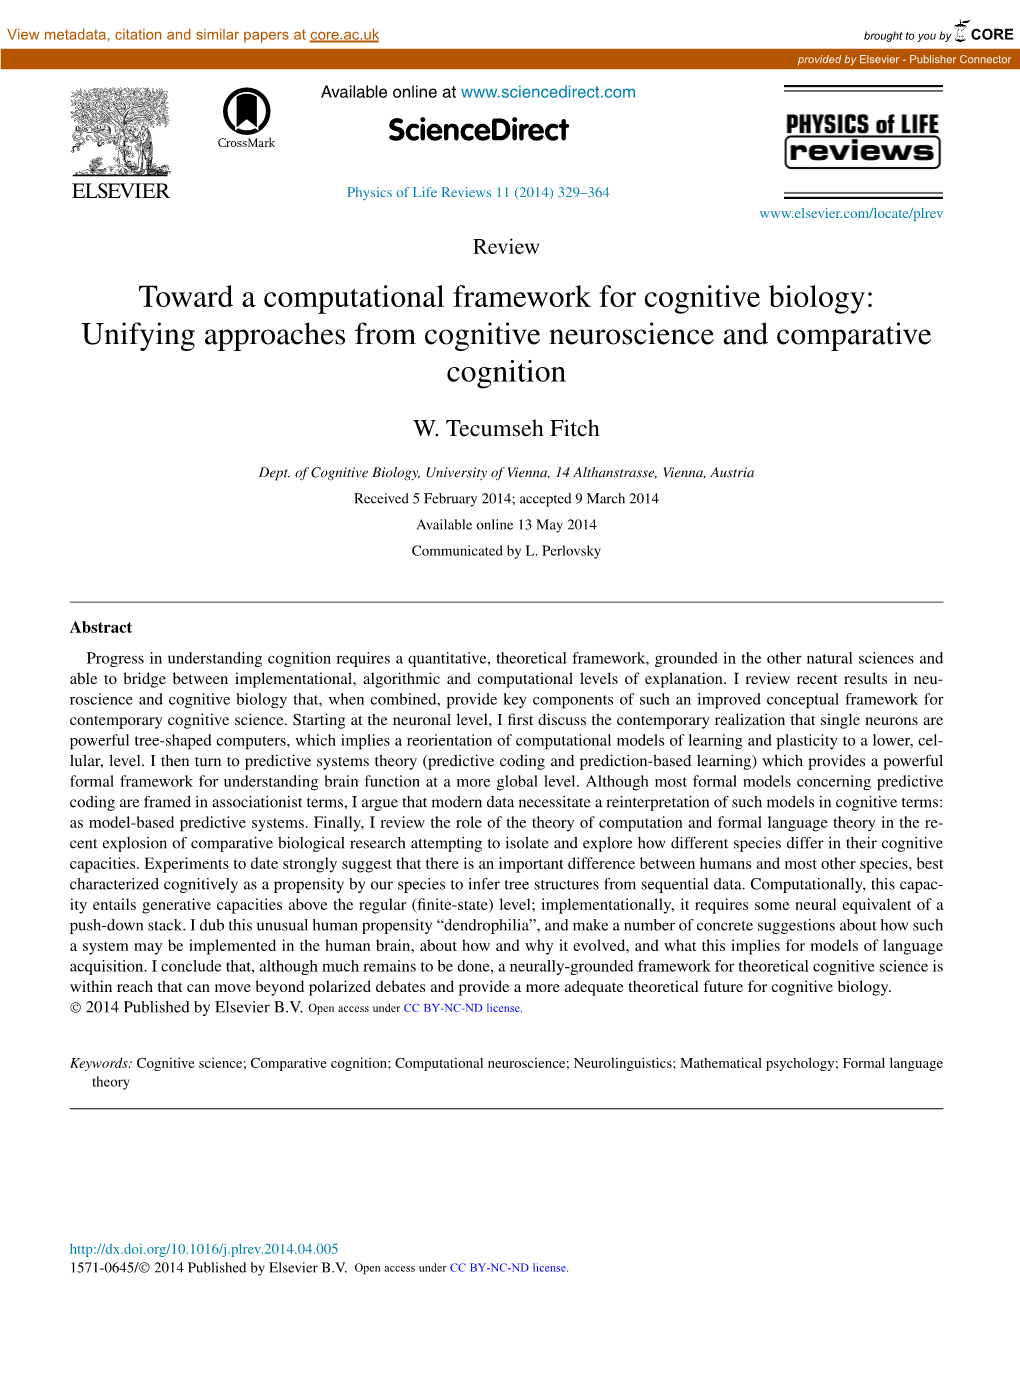 Toward a Computational Framework for Cognitive Biology: Unifying Approaches from Cognitive Neuroscience and Comparative Cognition